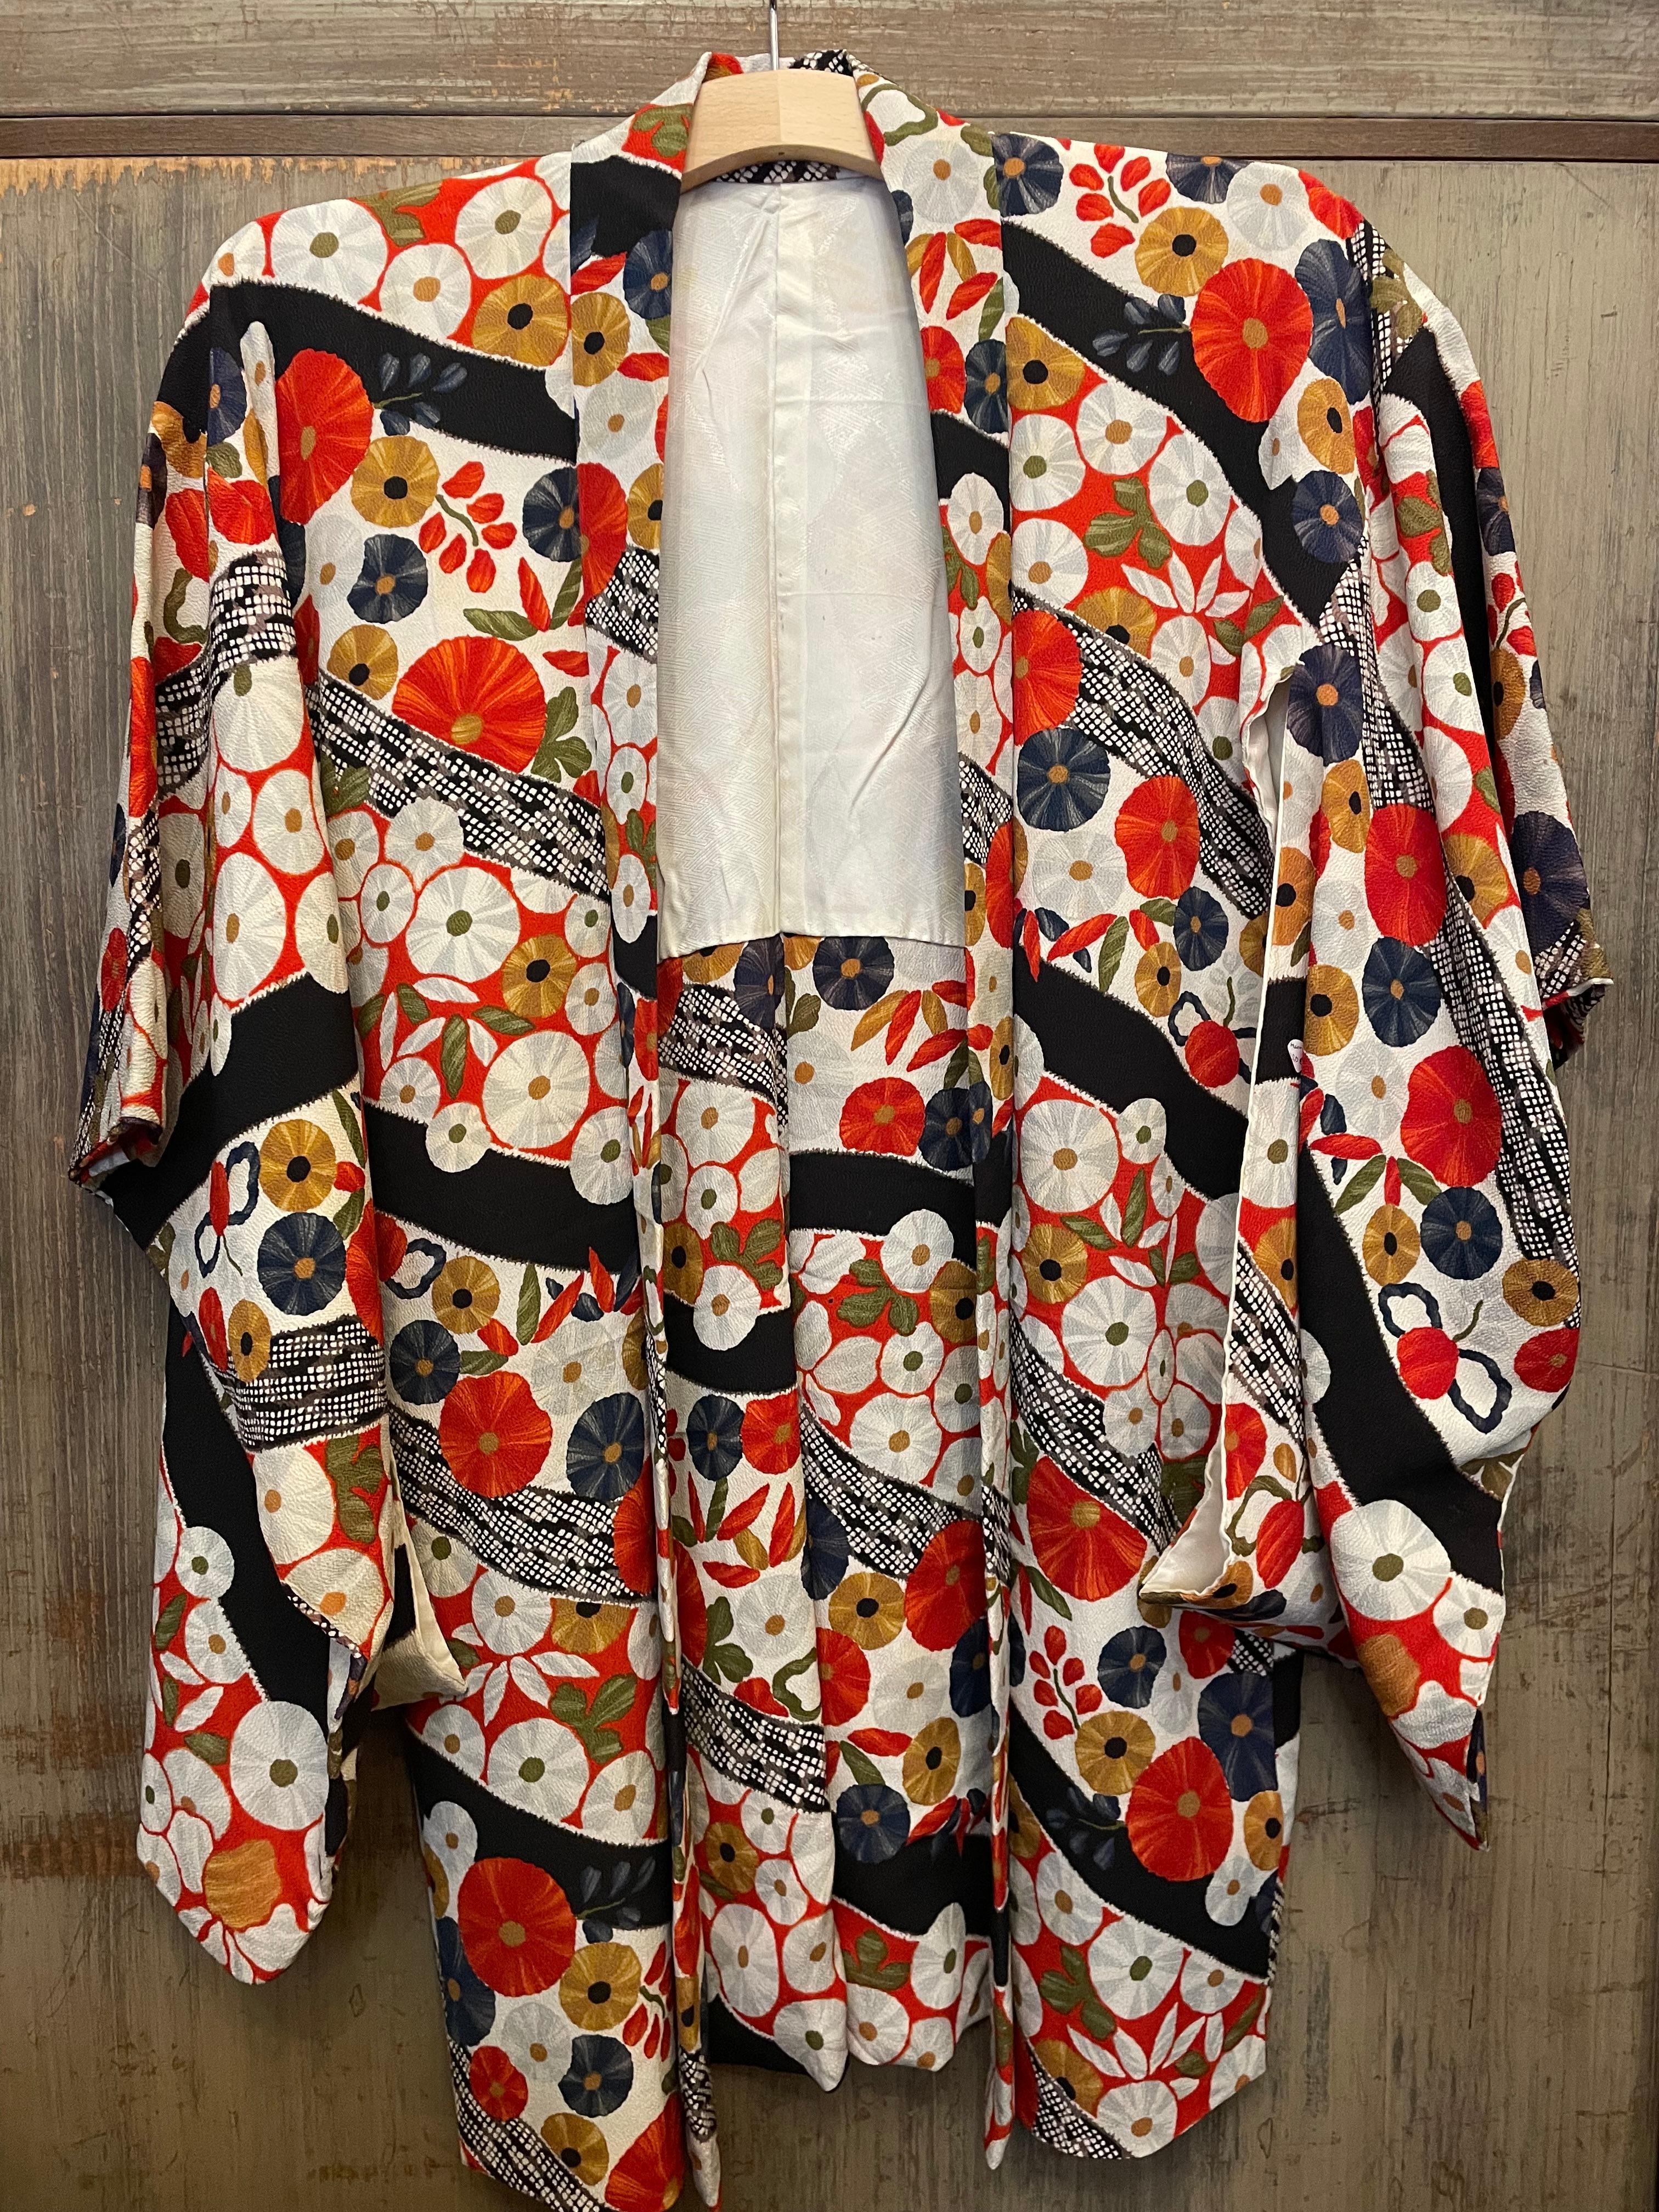 This is a silk jacket which was made in Japan.
It was made in Showa era around 1980s.

The haori is a traditional Japanese hip- or thigh-length jacket worn over a kimono. Resembling a shortened kimono with no overlapping front panels (okumi), the